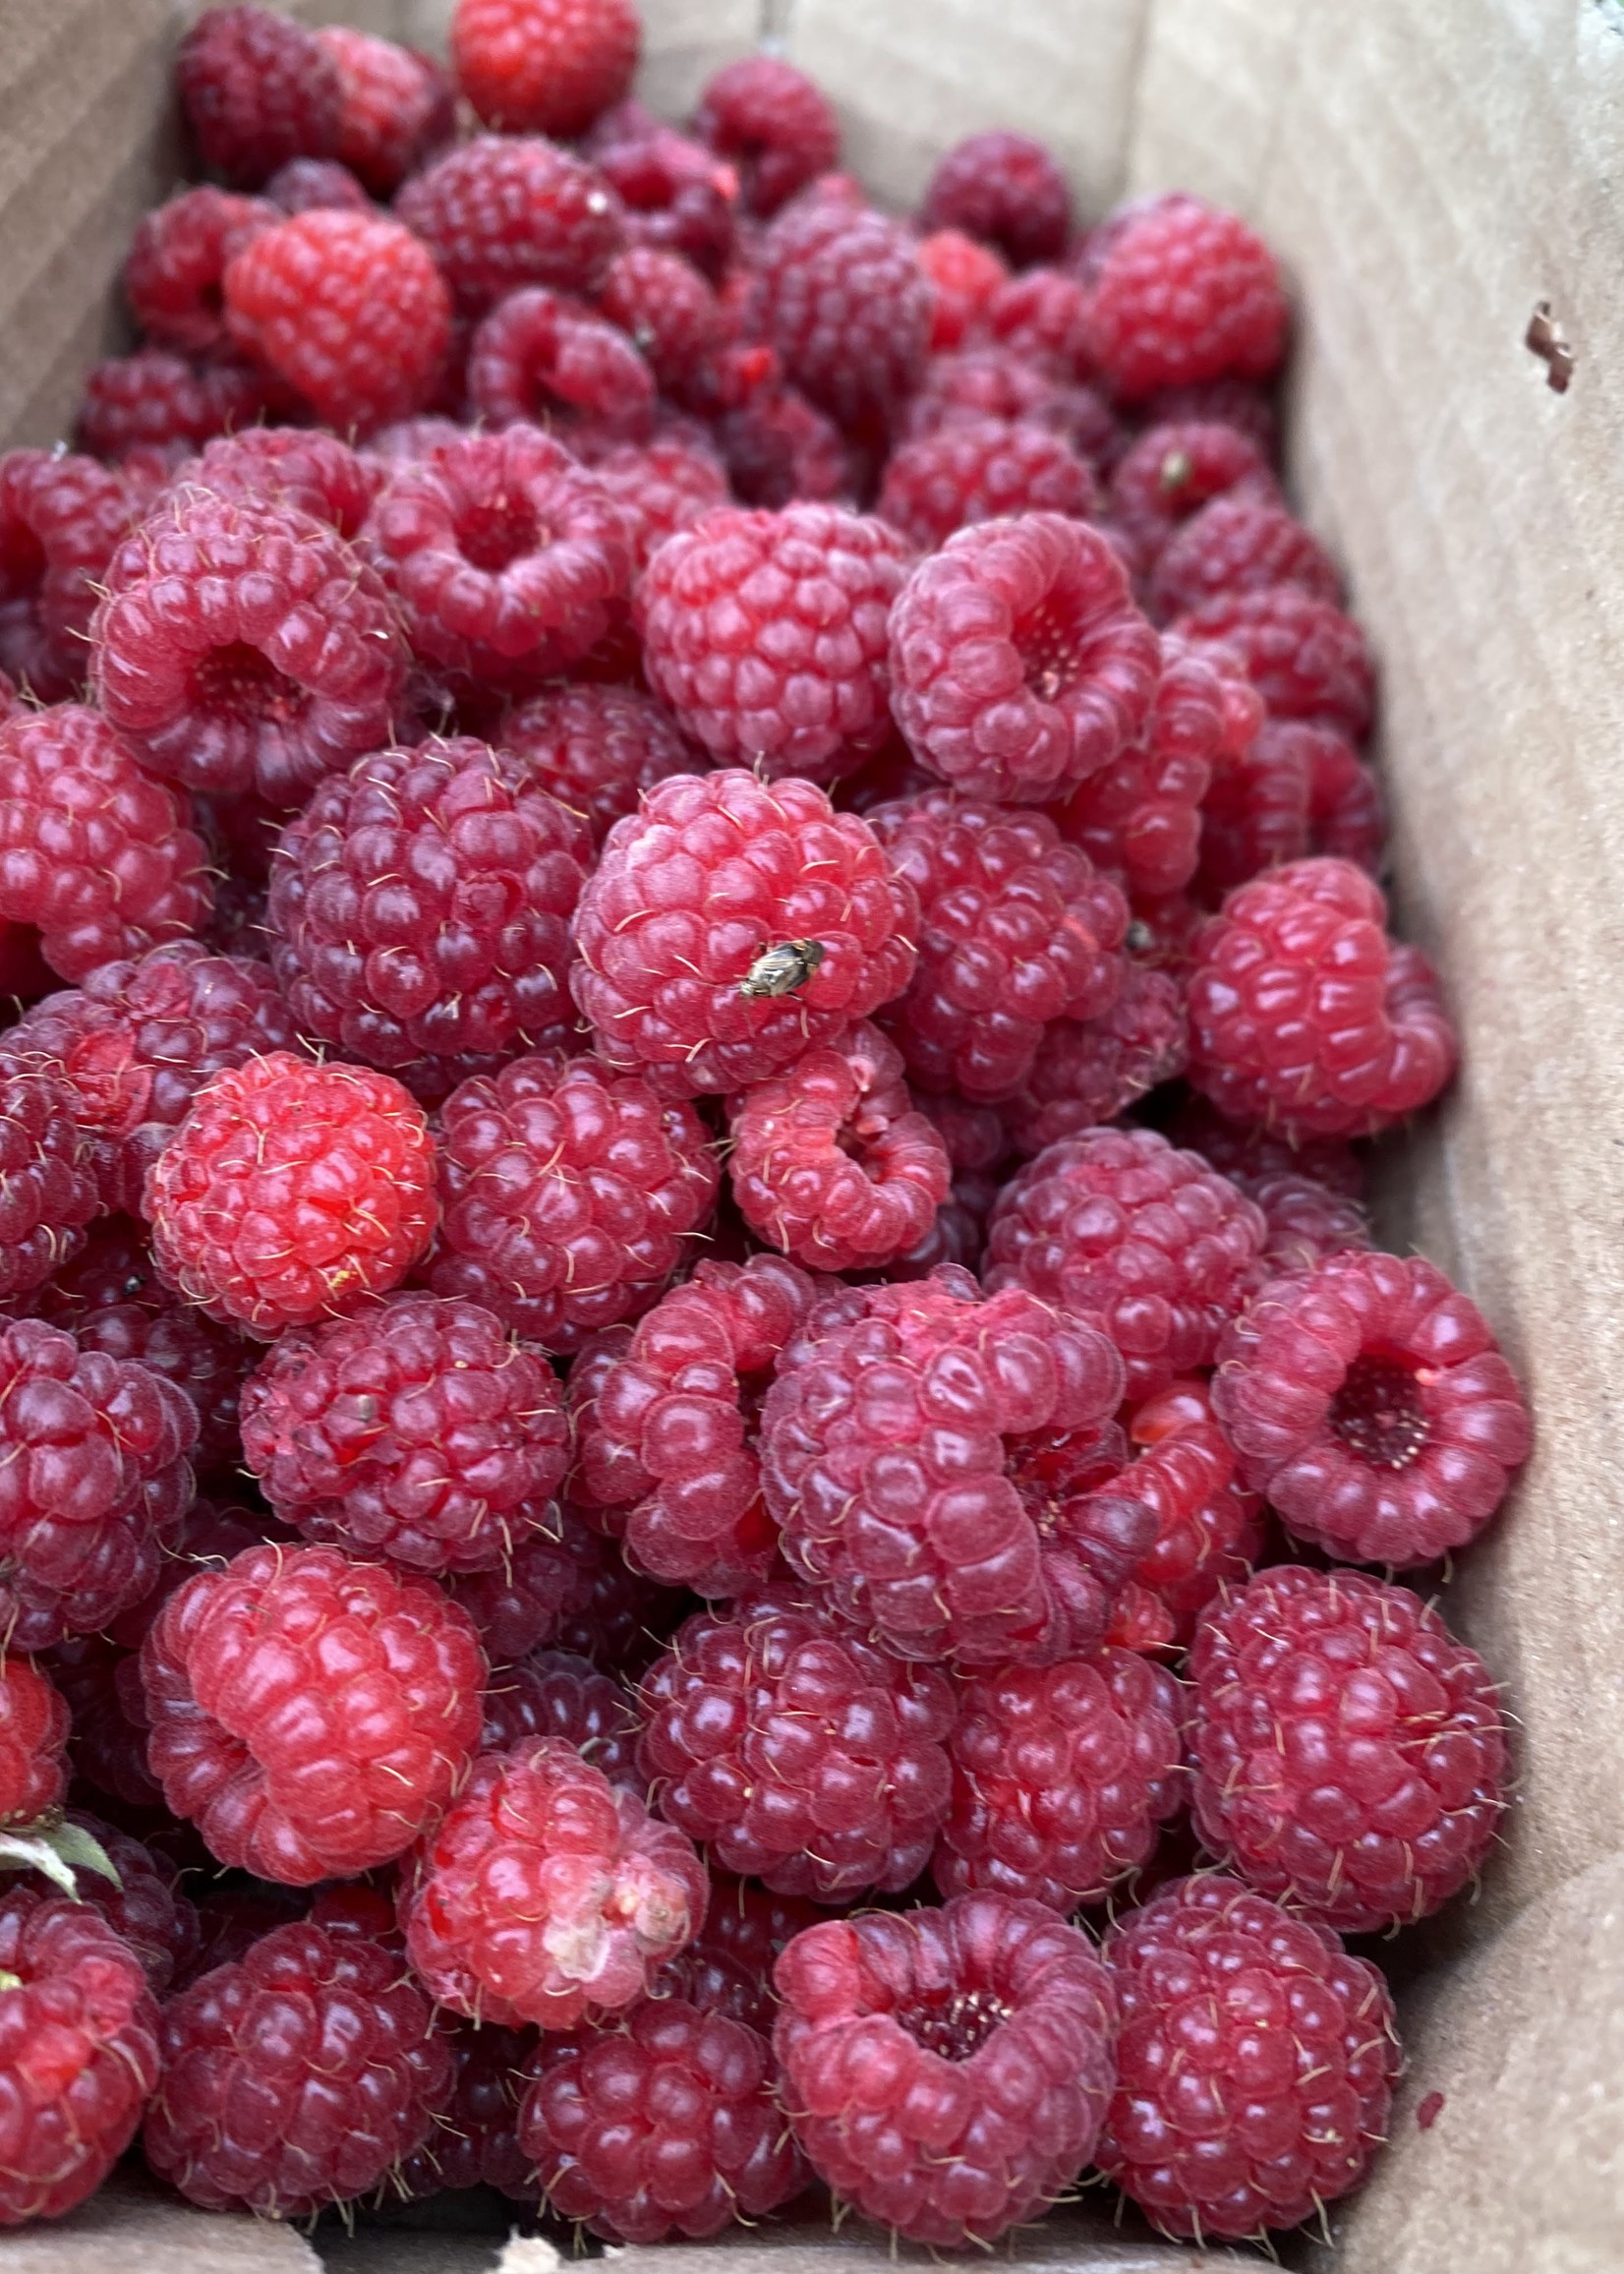 Campbell's Orchards Raspberries